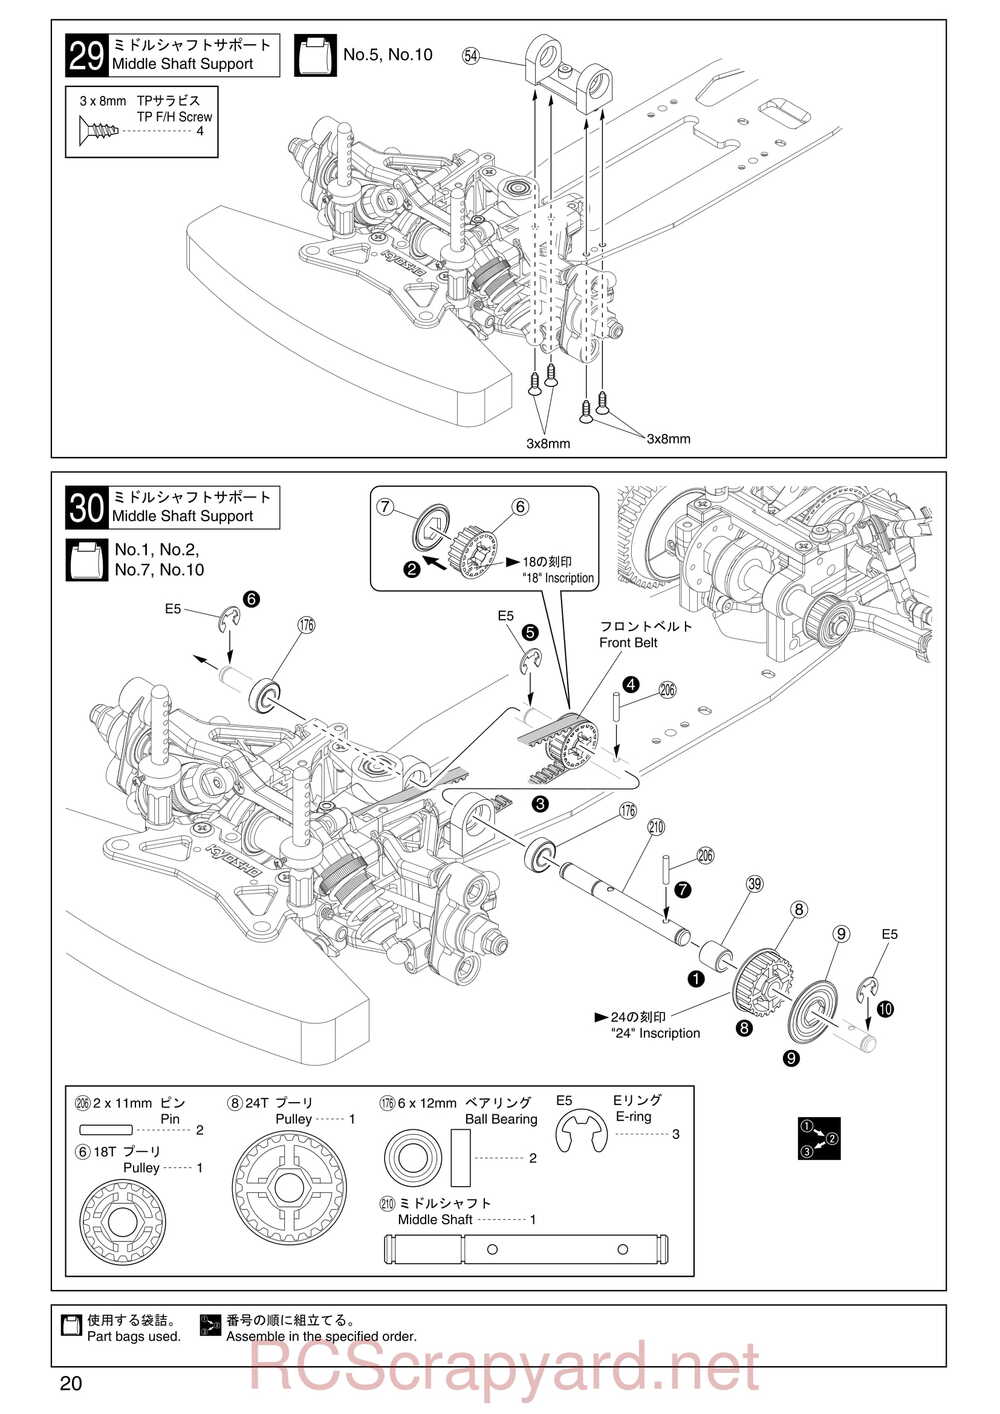 Kyosho - 31257 - V-One RRR Rubber - Manual - Page 20